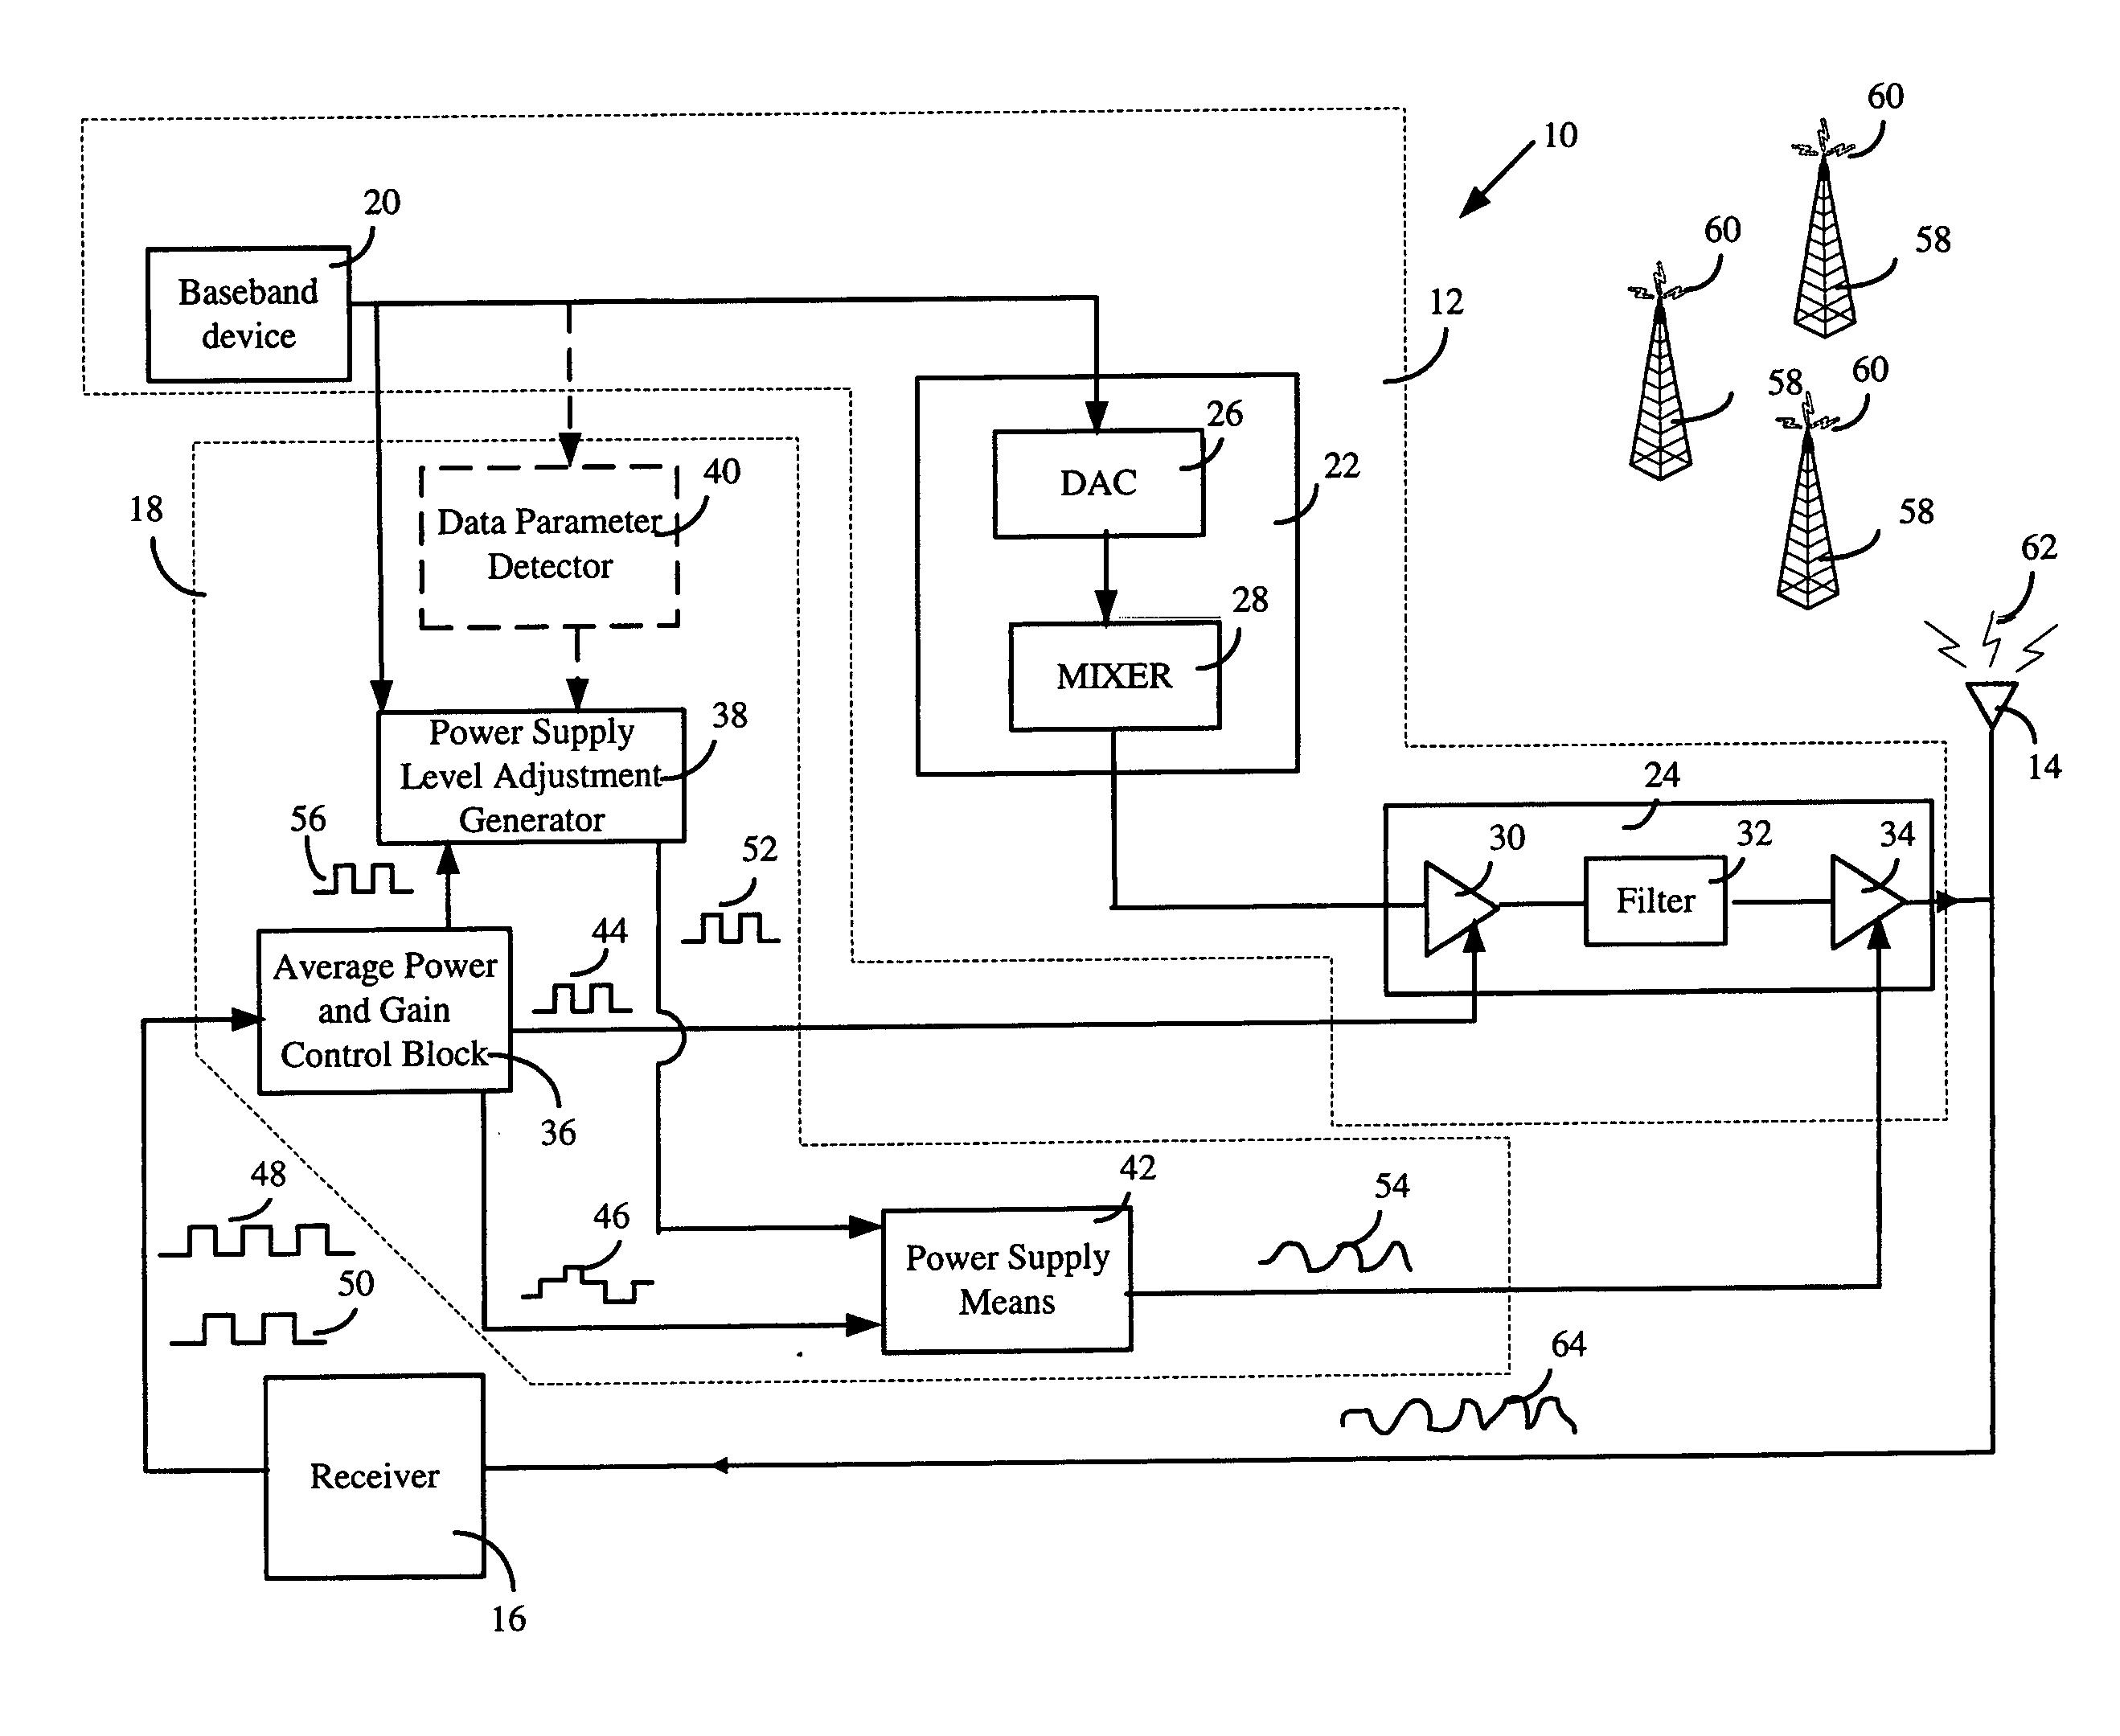 Method and apparatus for improving power amplifier efficiency in wireless communication systems having high peak to average power ratios